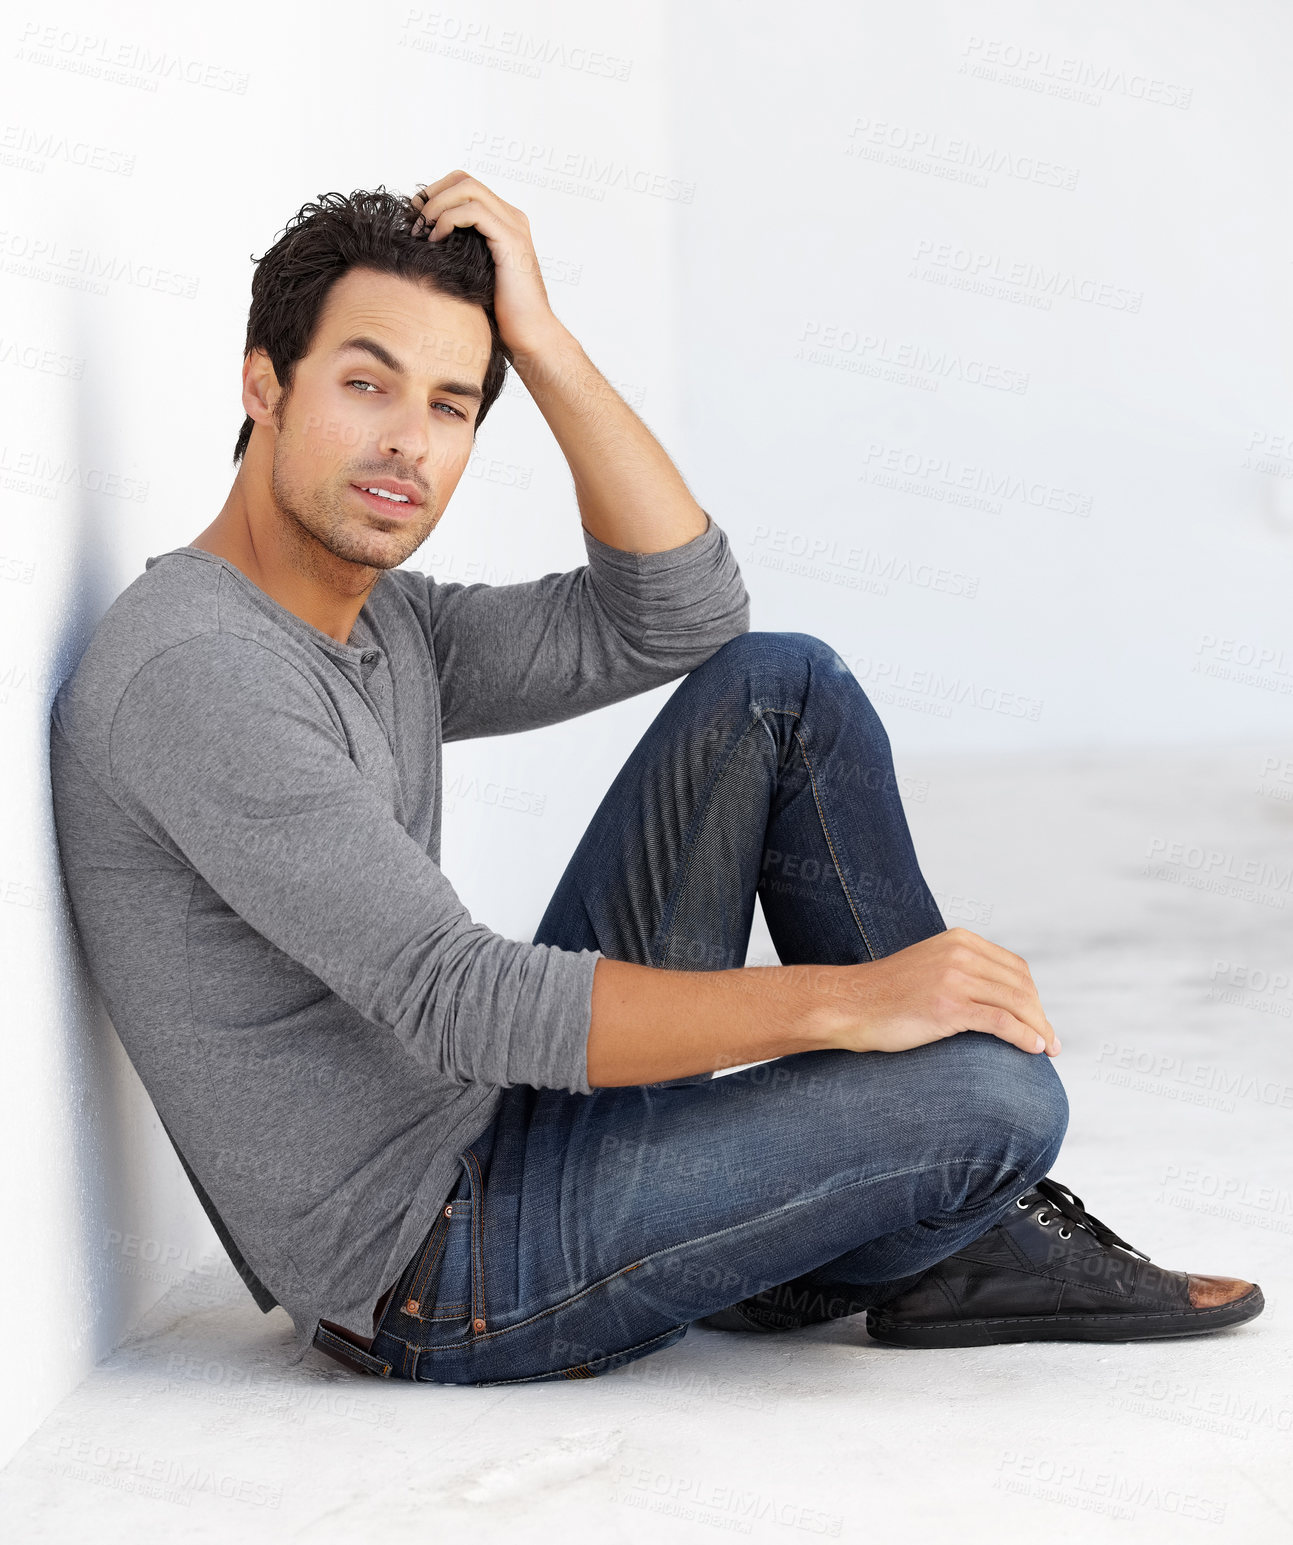 Buy stock photo Shot of a handsome young man sitting on the floor leaning against a white wall